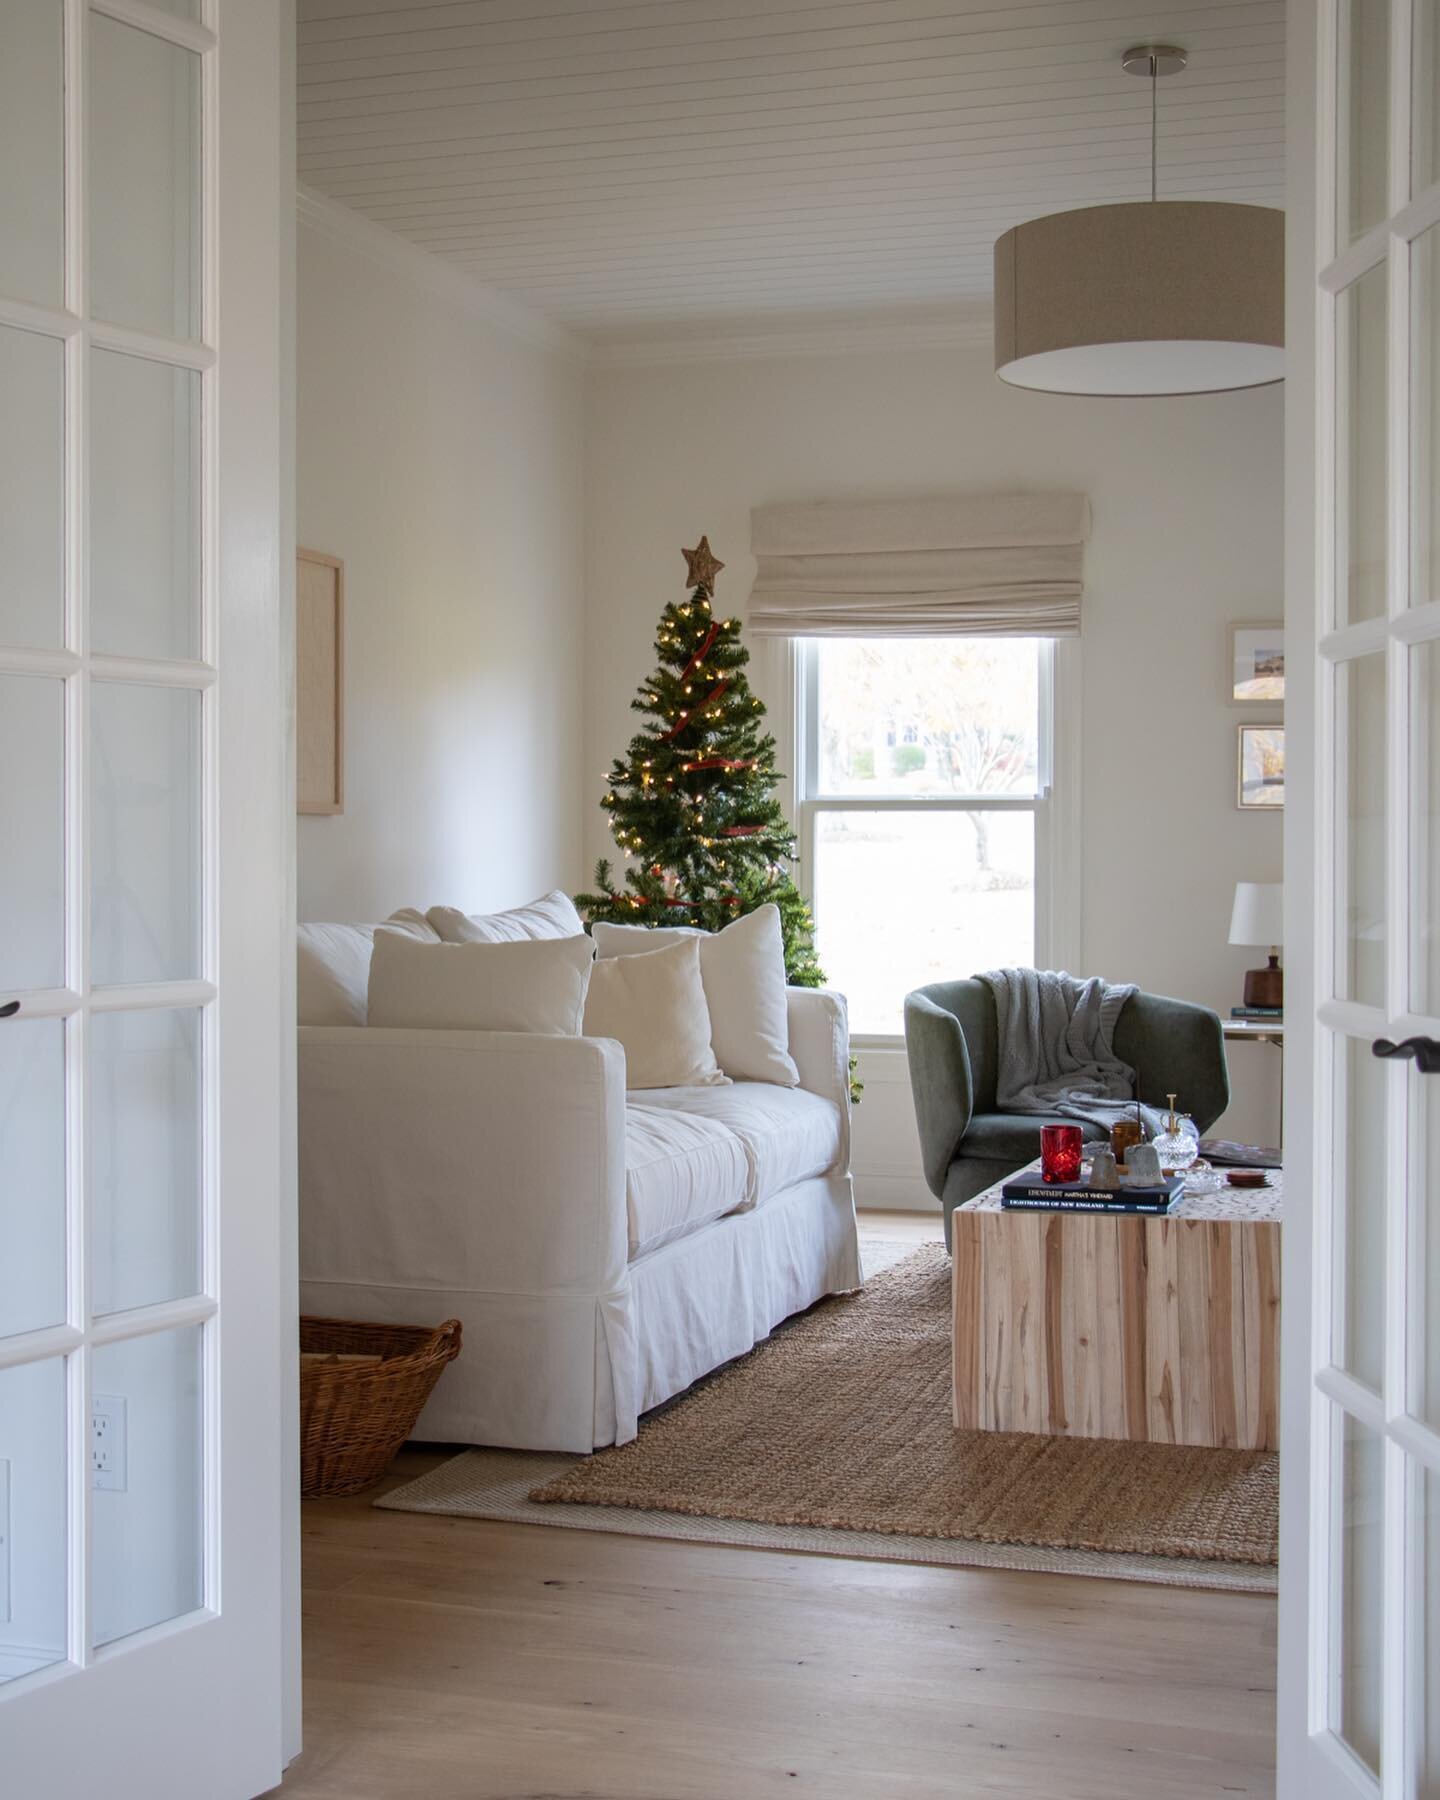 A look back at a bit of last year&rsquo;s holiday home 🎄 This year I&rsquo;m going to start applying the &ldquo;capsule home&rdquo; strategy to my Christmas decorating. I&rsquo;m talking all about it on the blog today along with tips and ideas on ho